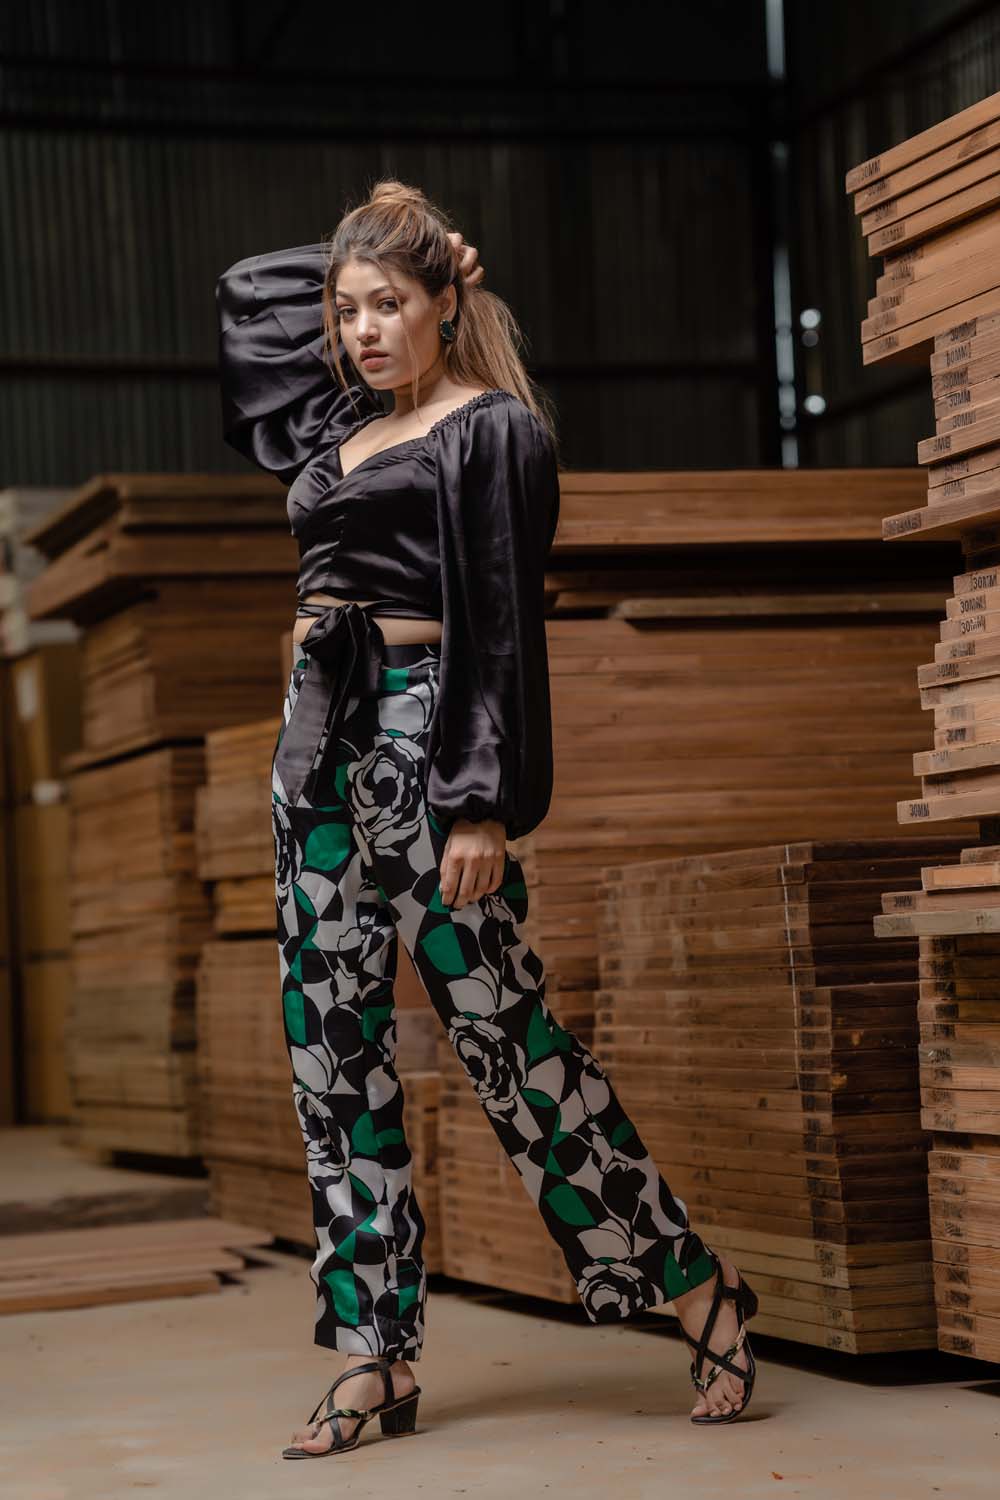 Holly - Black Crop Top with Printed Green Pant Set